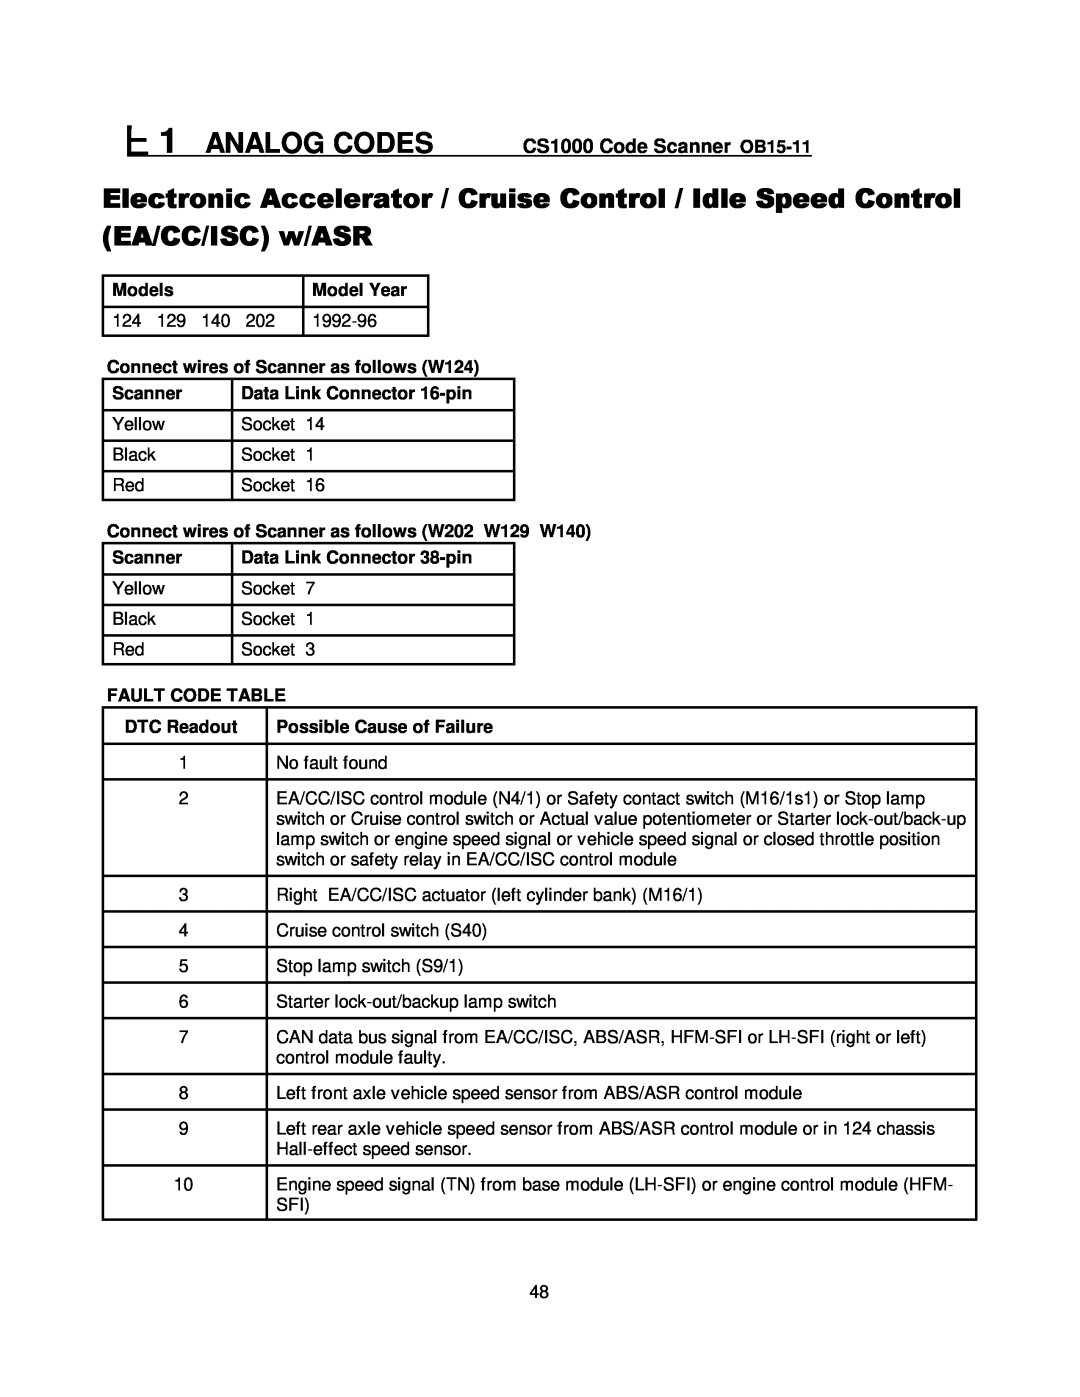 Mercedes-Benz ANALOGCODESCS1000 Code Scanner OB15-11, Models, Model Year, Connect wires of Scanner as follows W124 